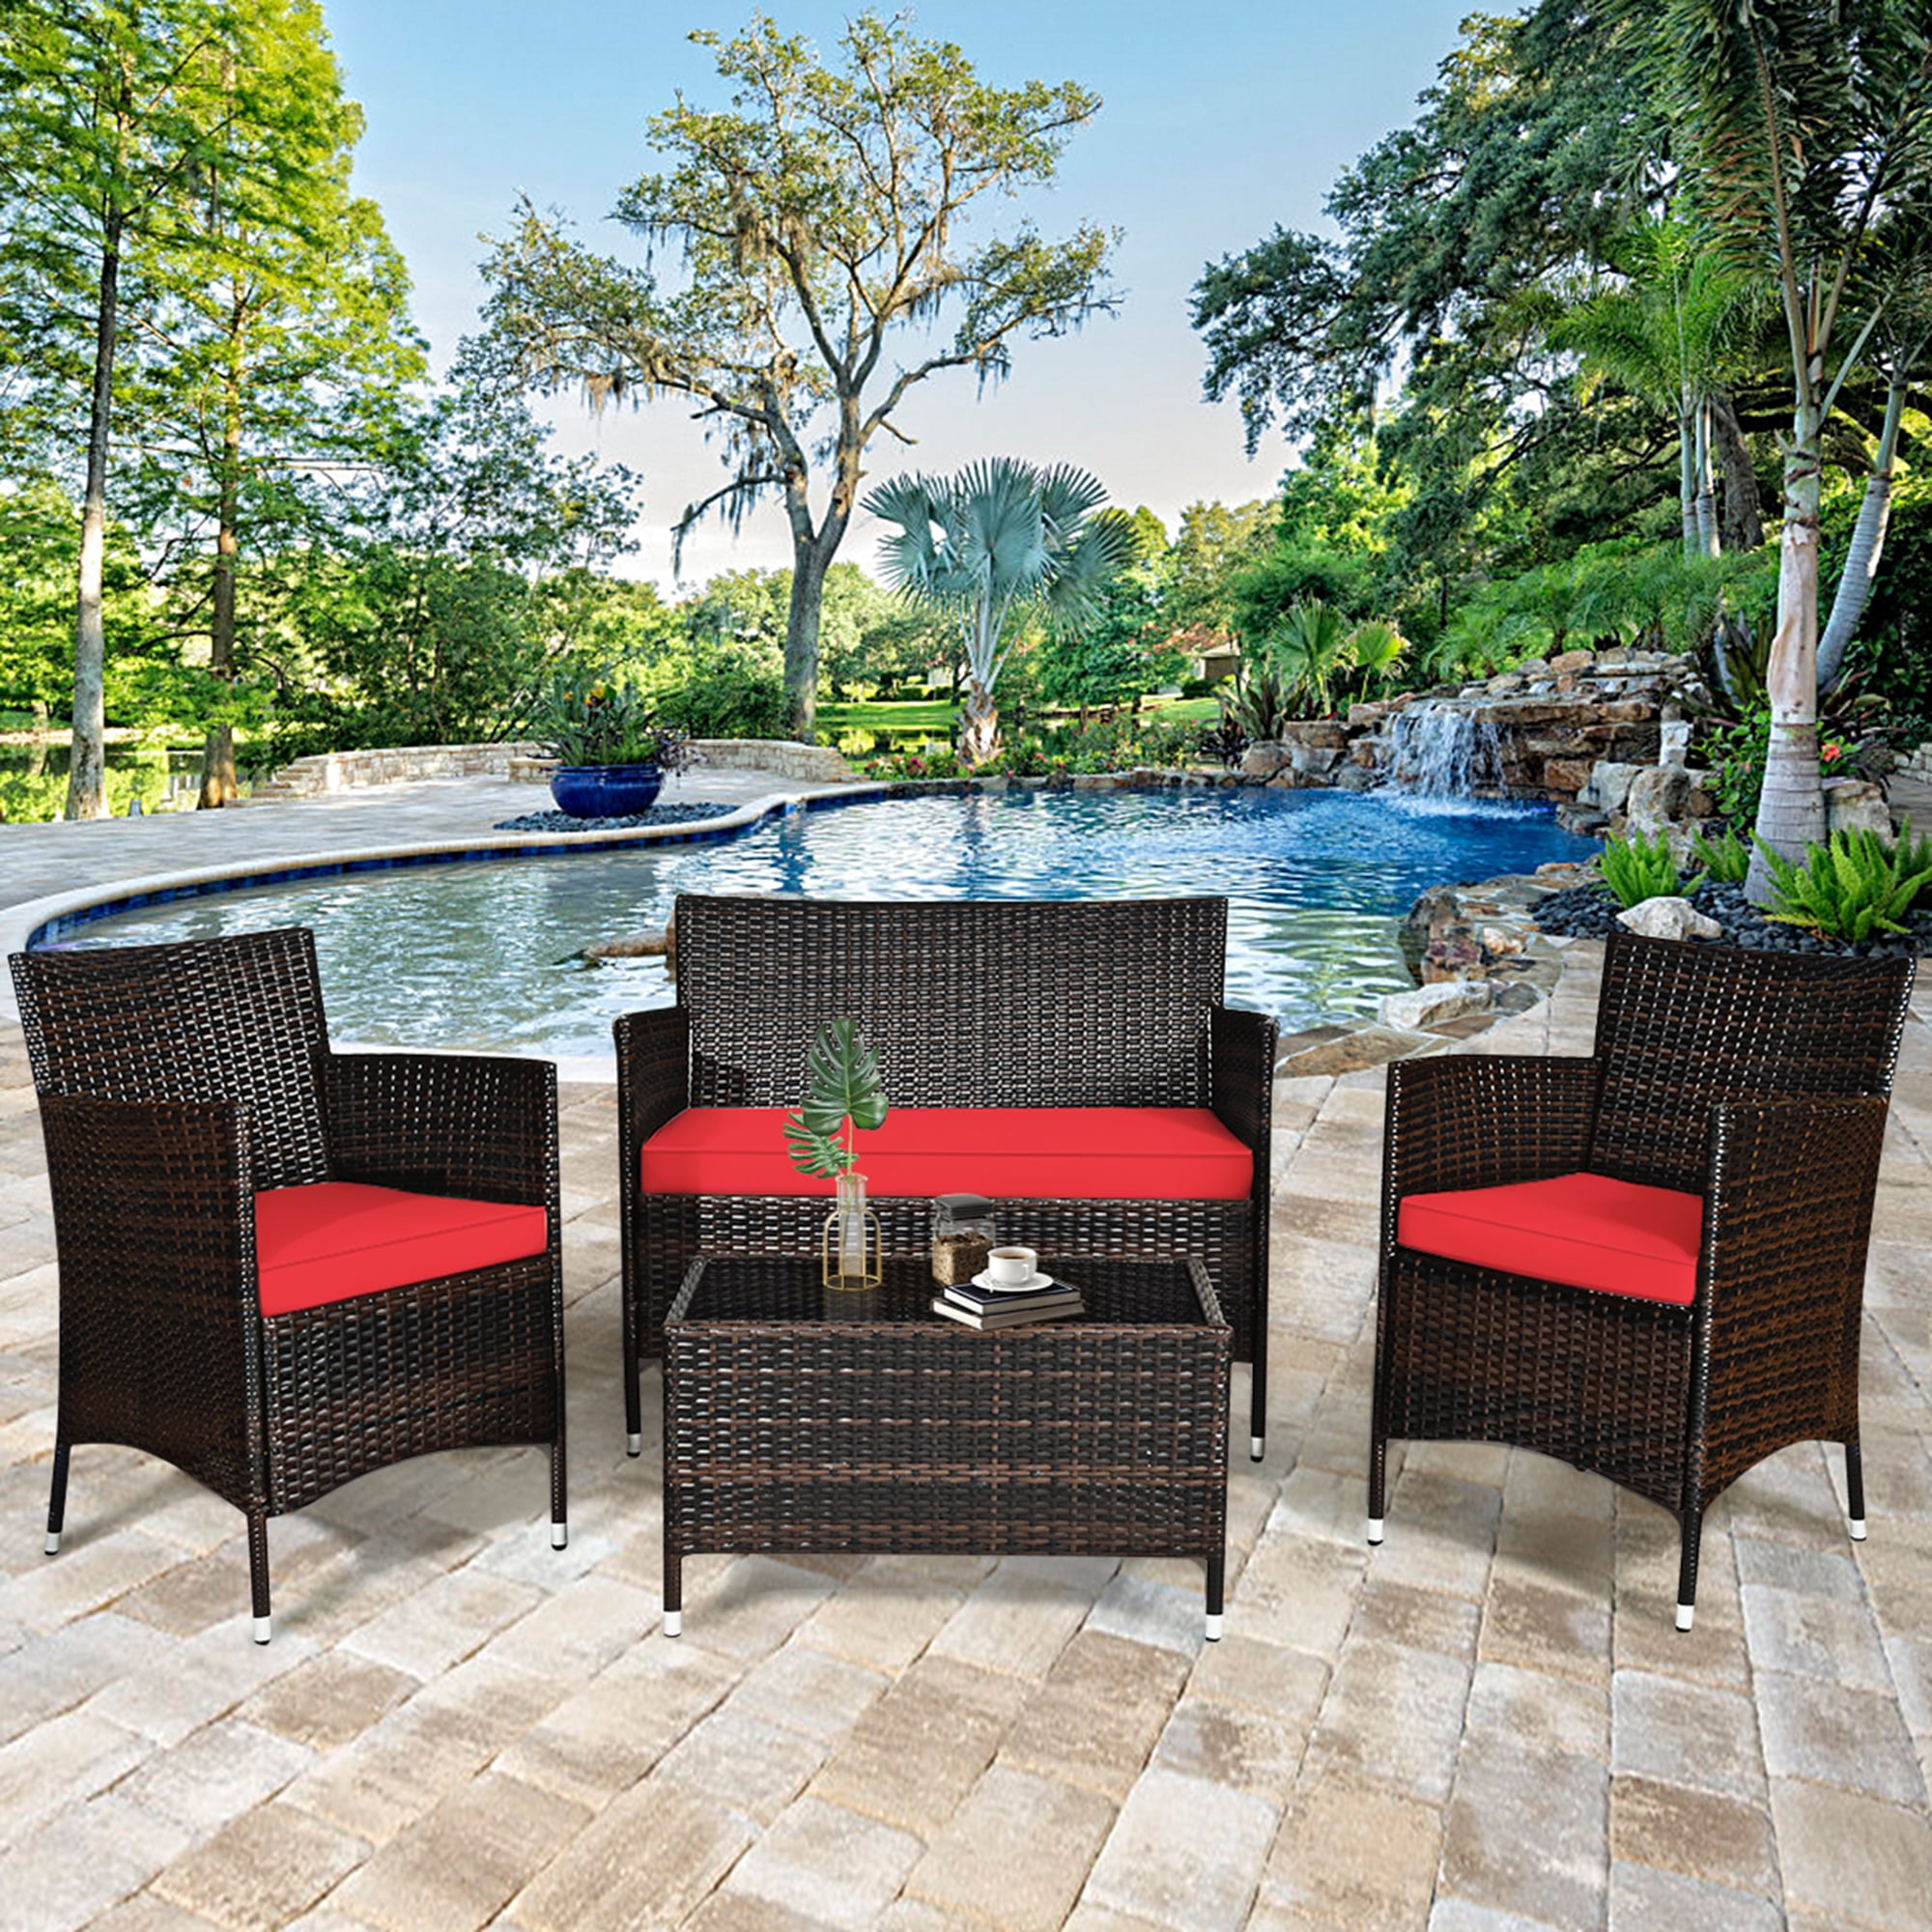 Gymax 4PCS Patio Rattan Conversation Furniture Set Outdoor w/ Red